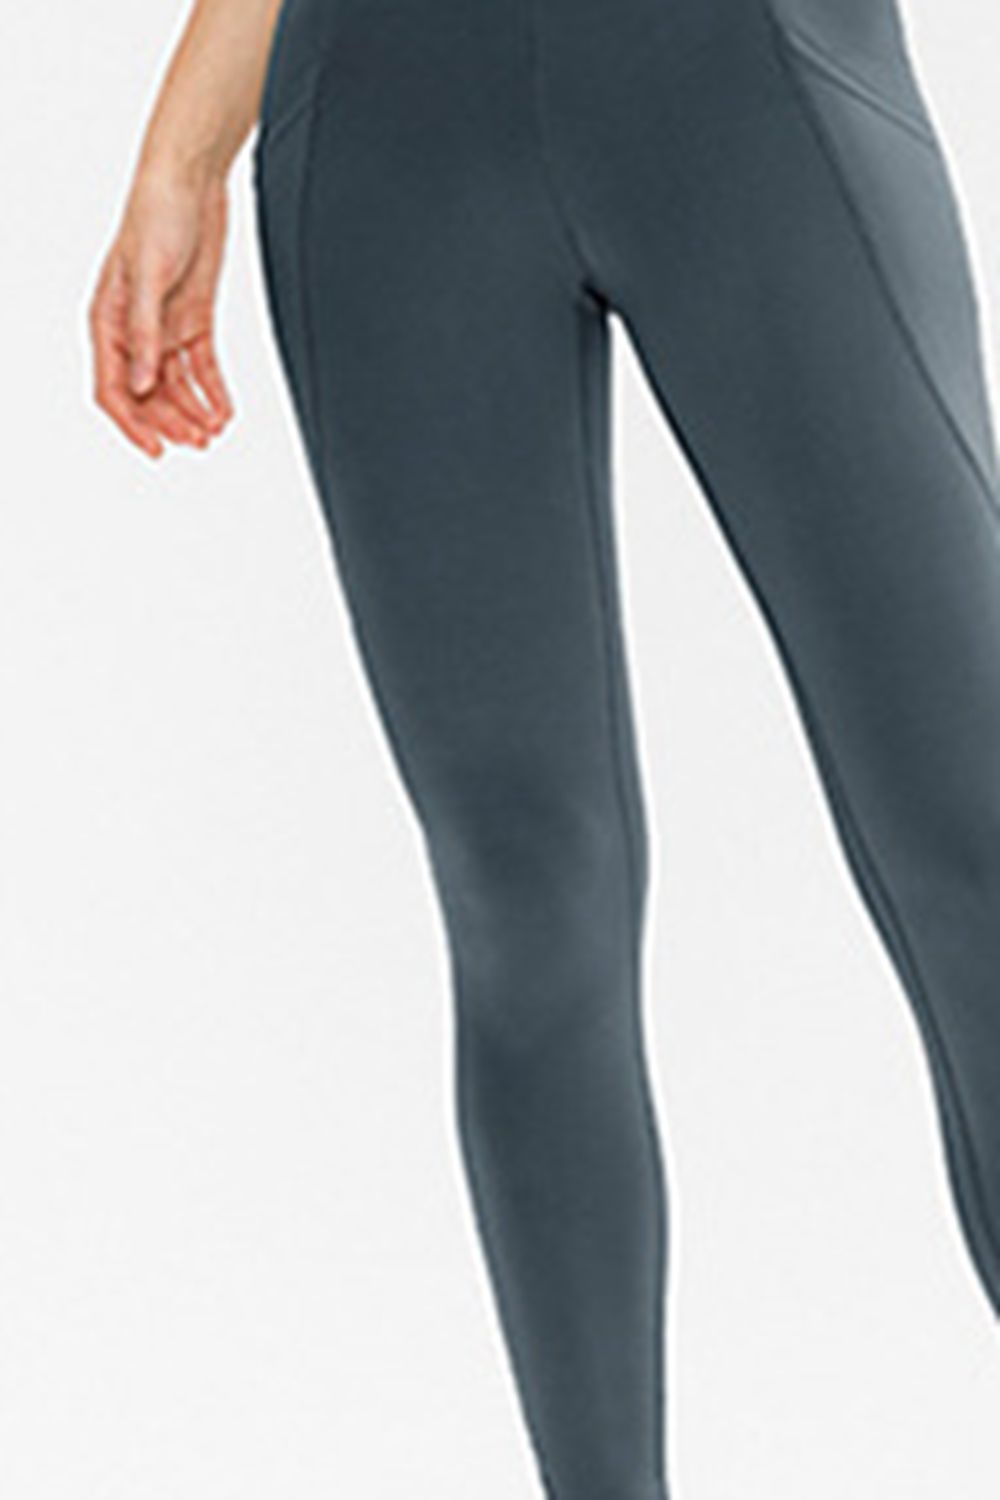 Slim Fit Long Active Leggings with Pockets - Women’s Clothing & Accessories - Activewear - 11 - 2024